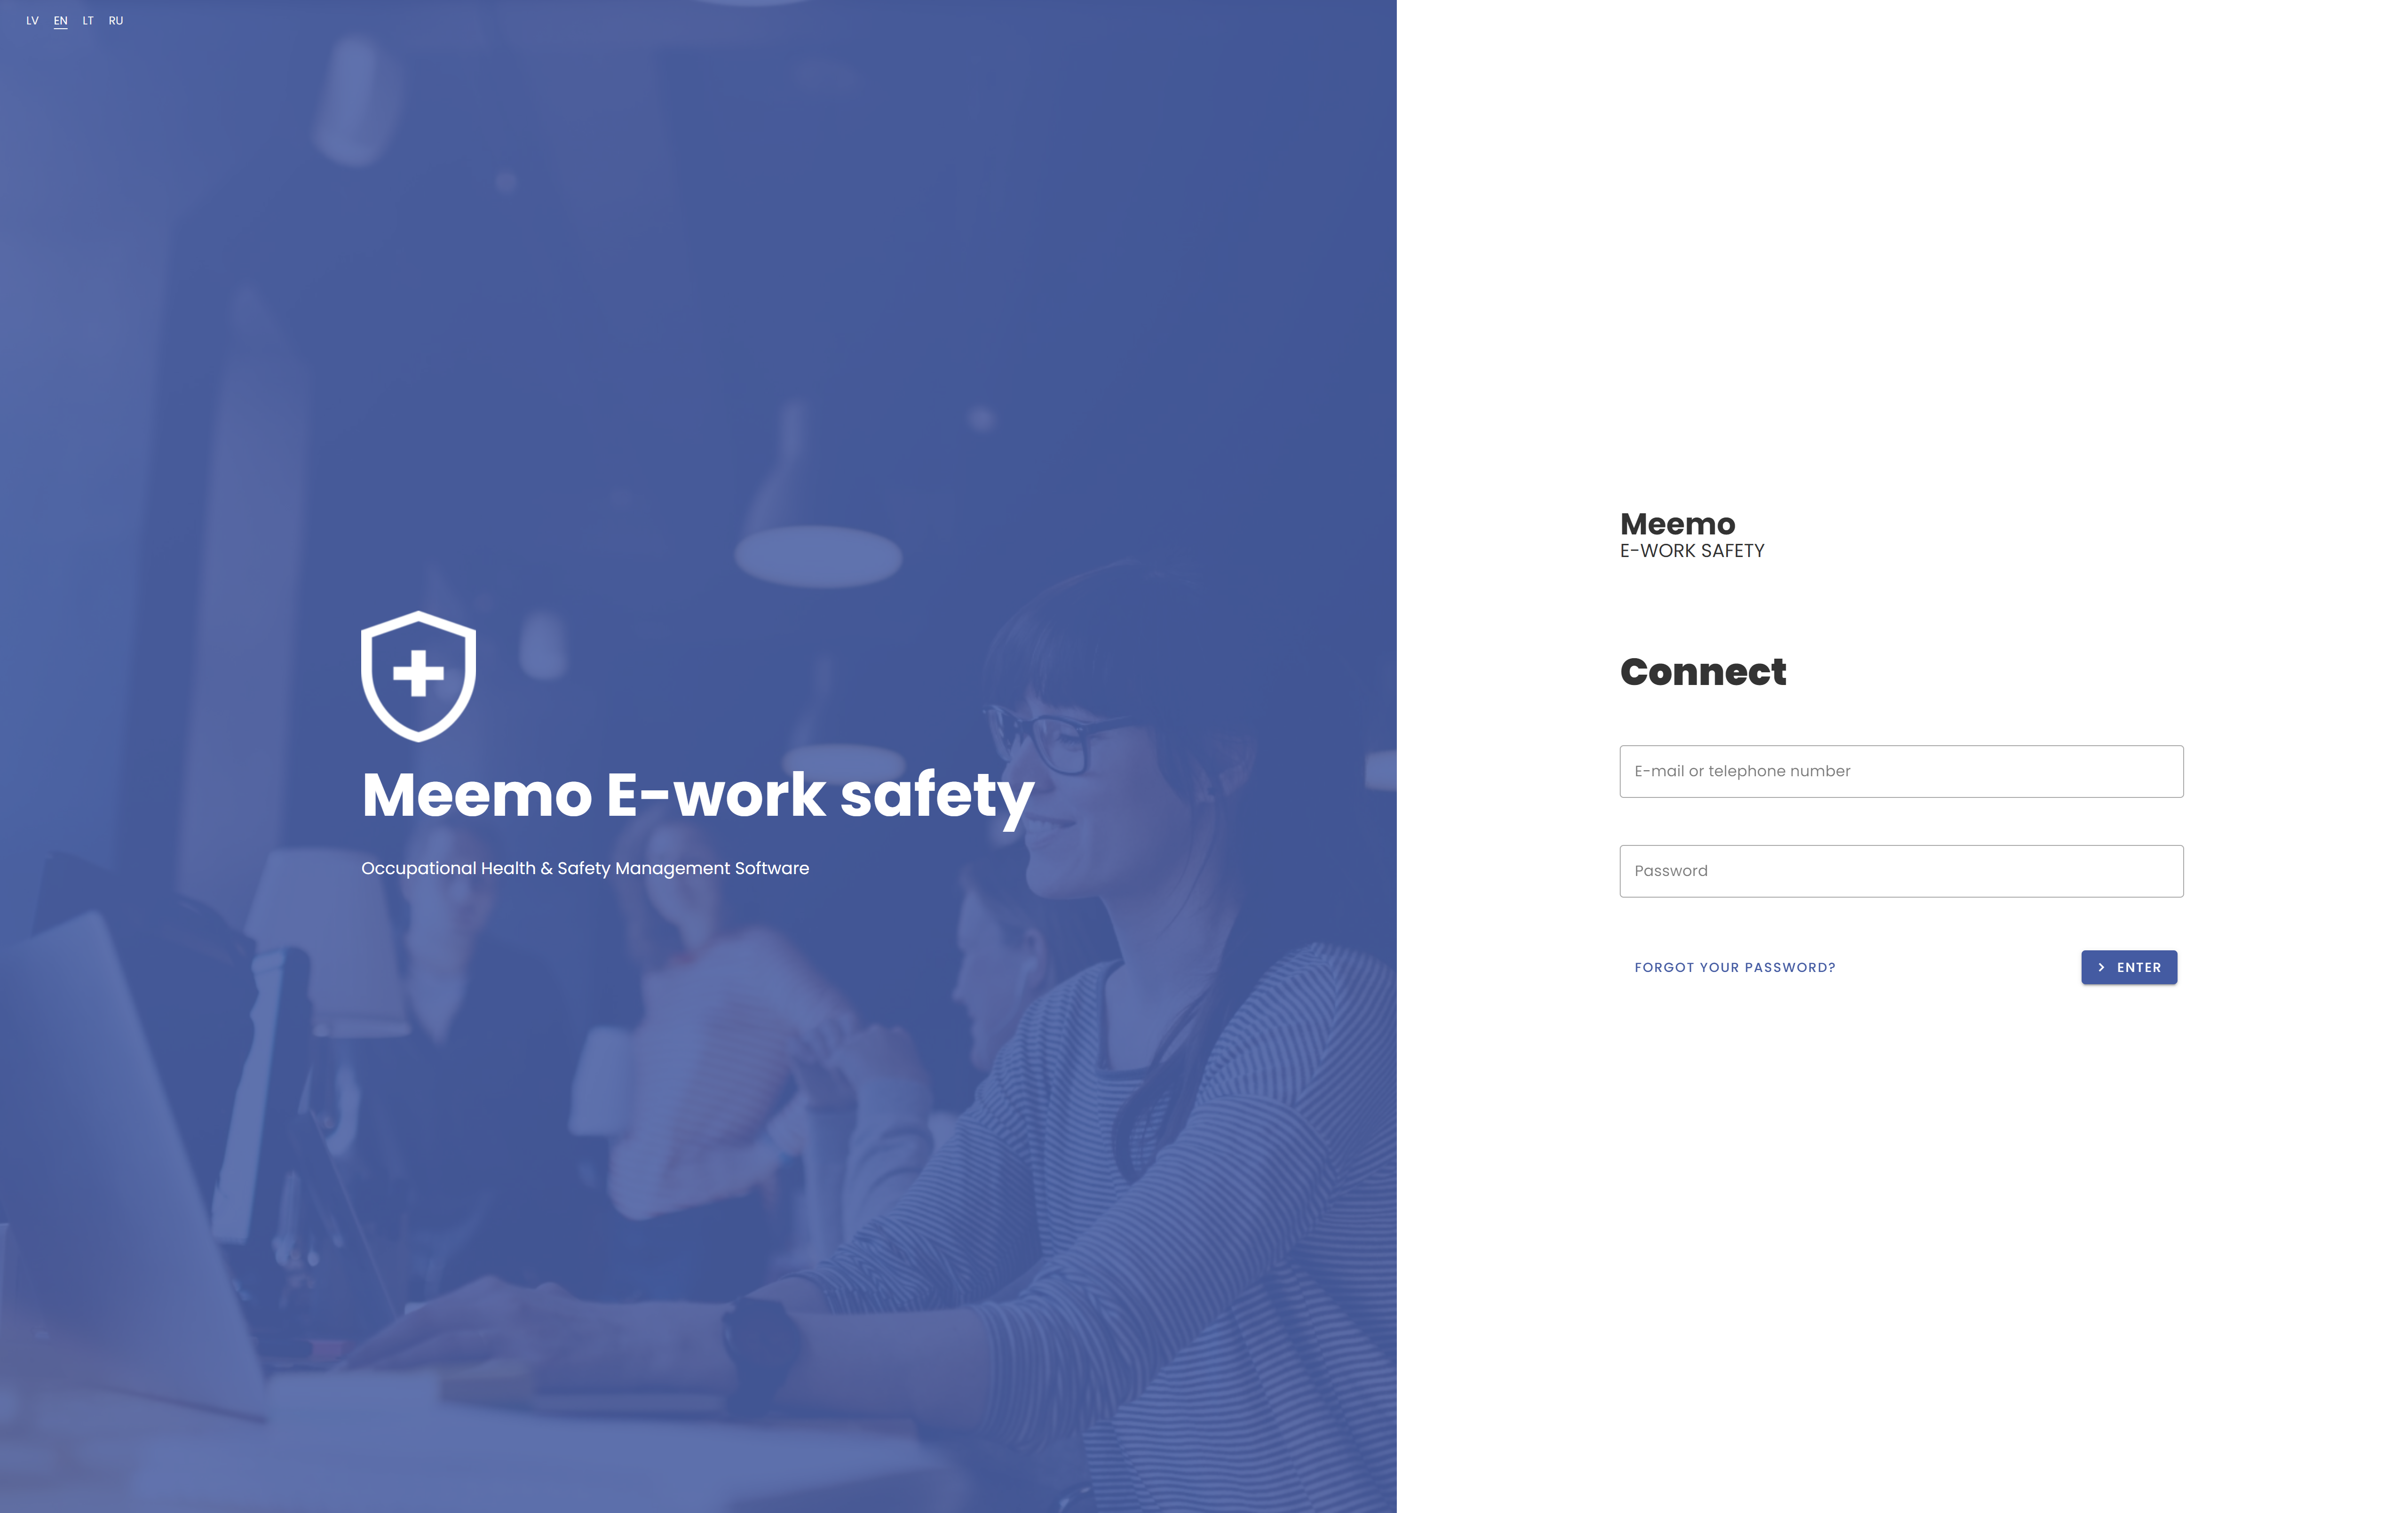 Meemo E-work safety authorization page